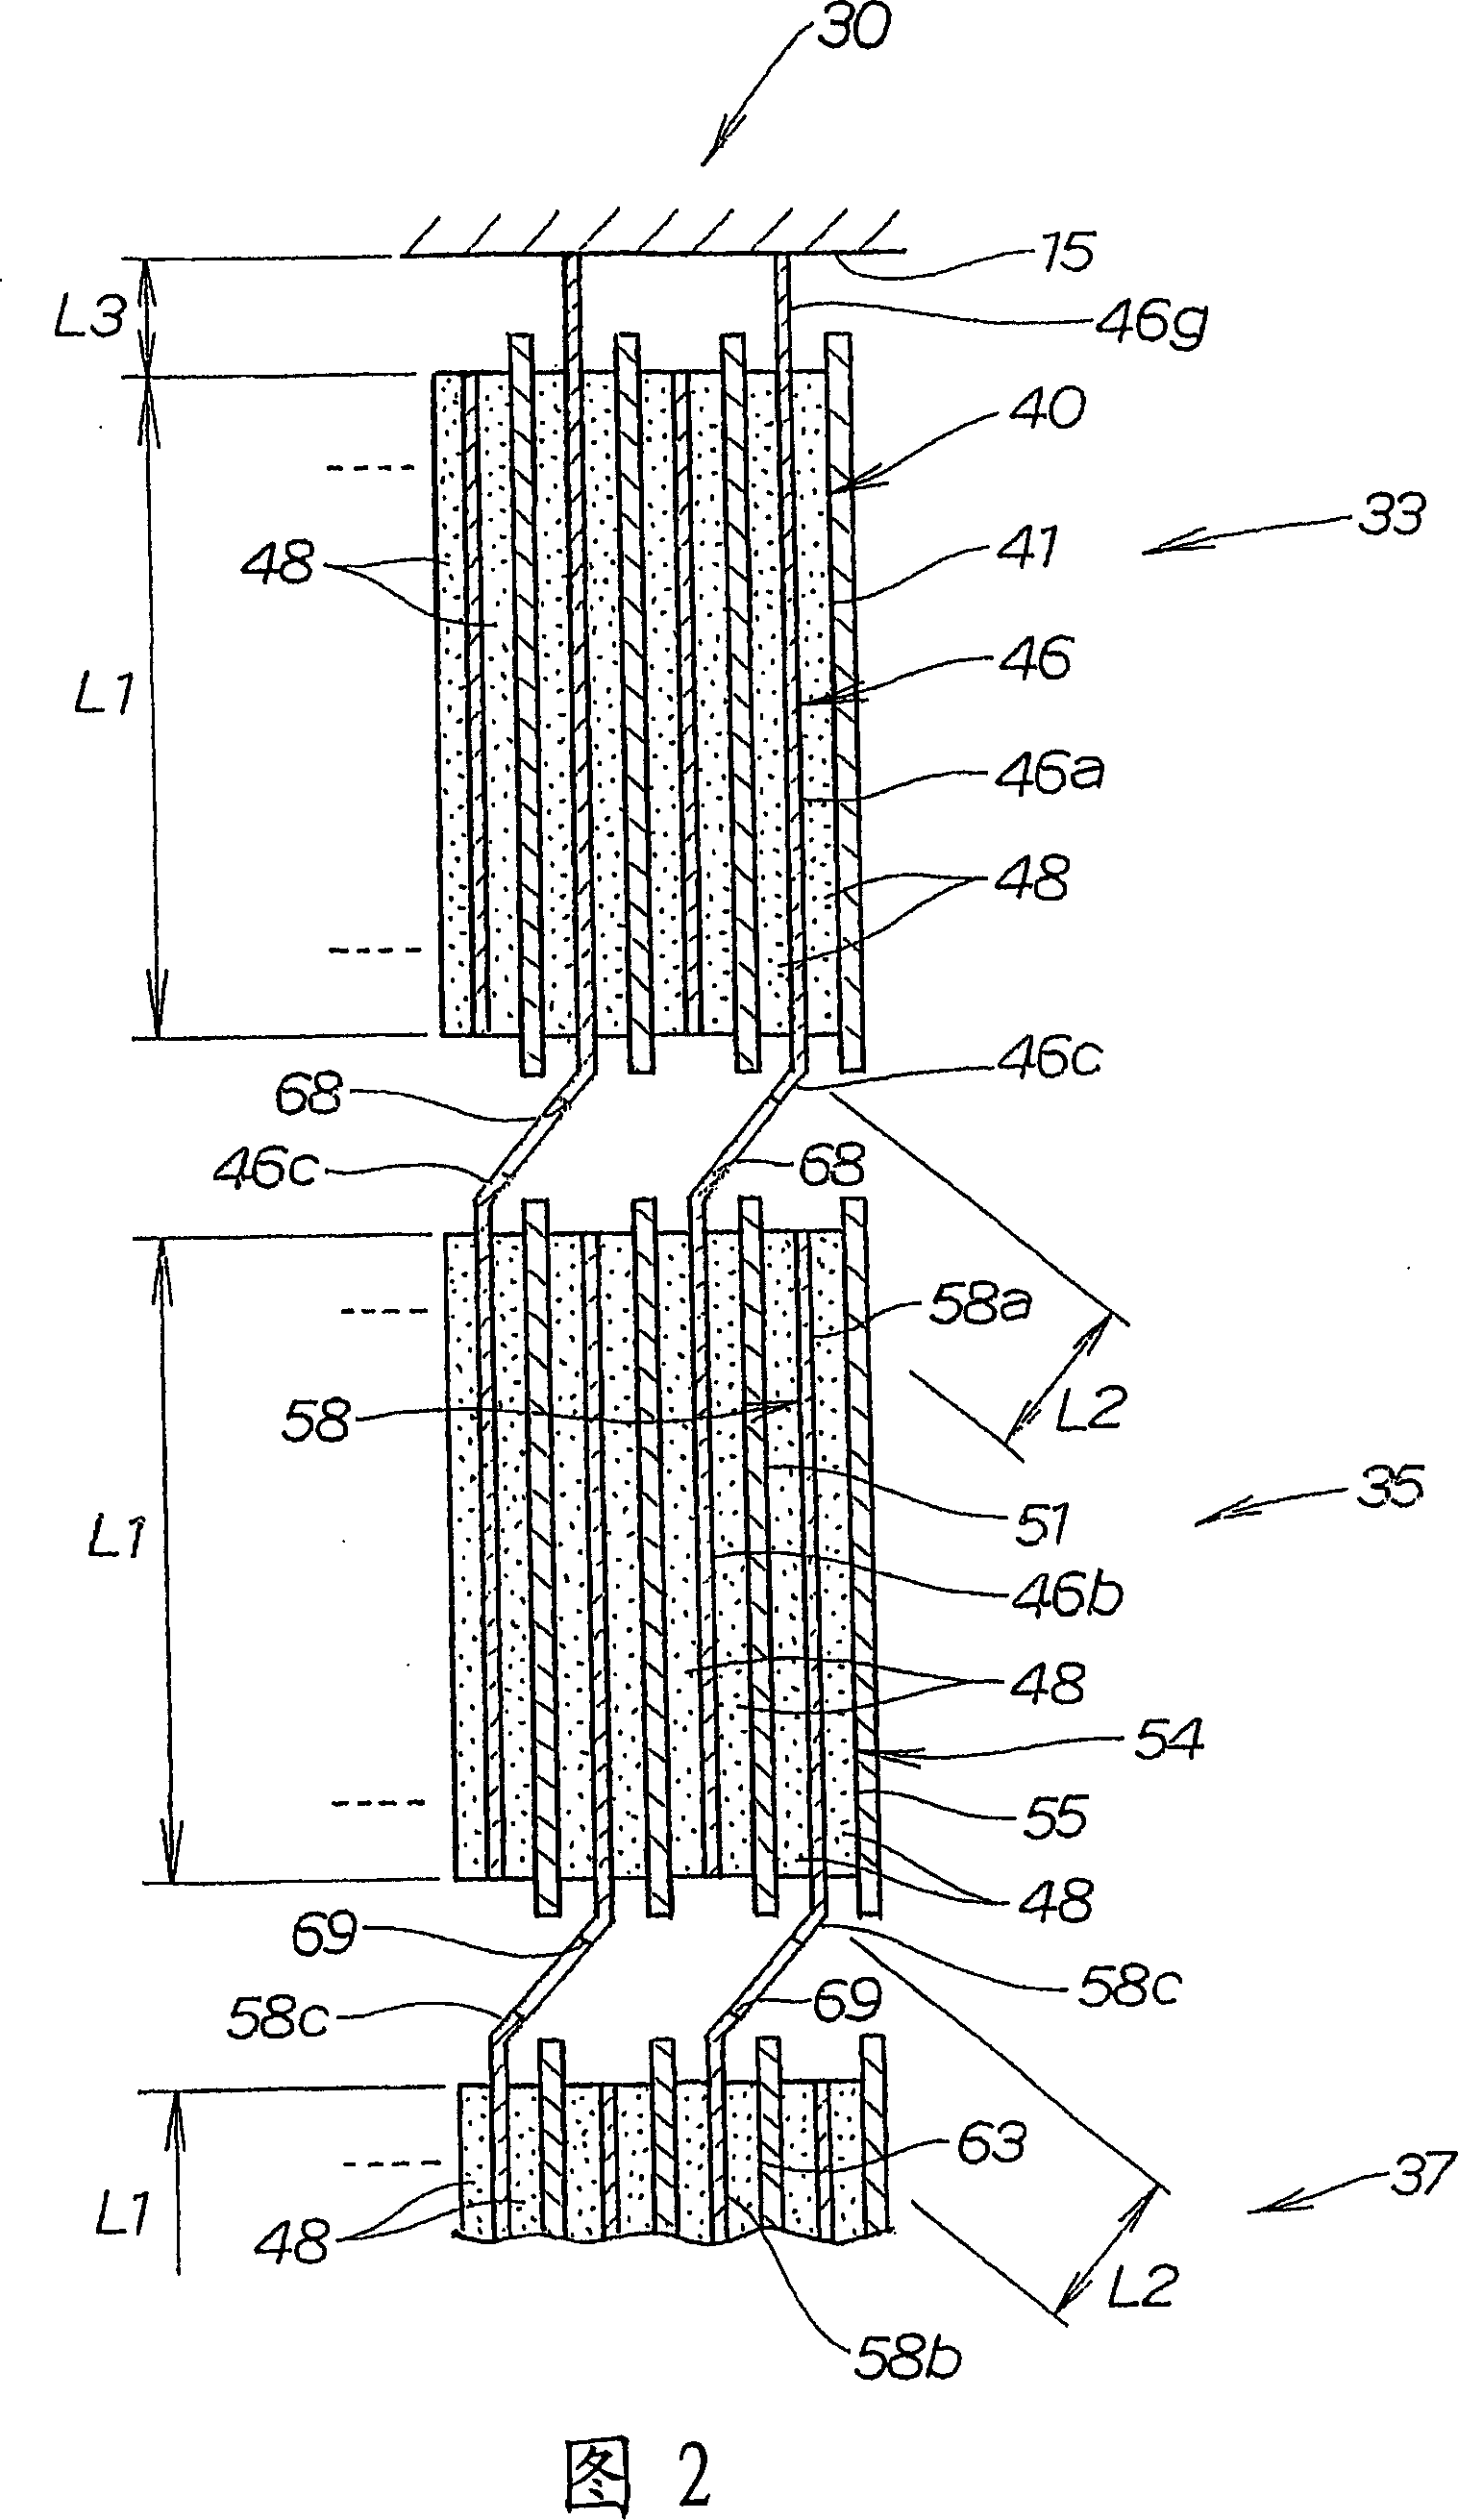 Accumulator cell assembly